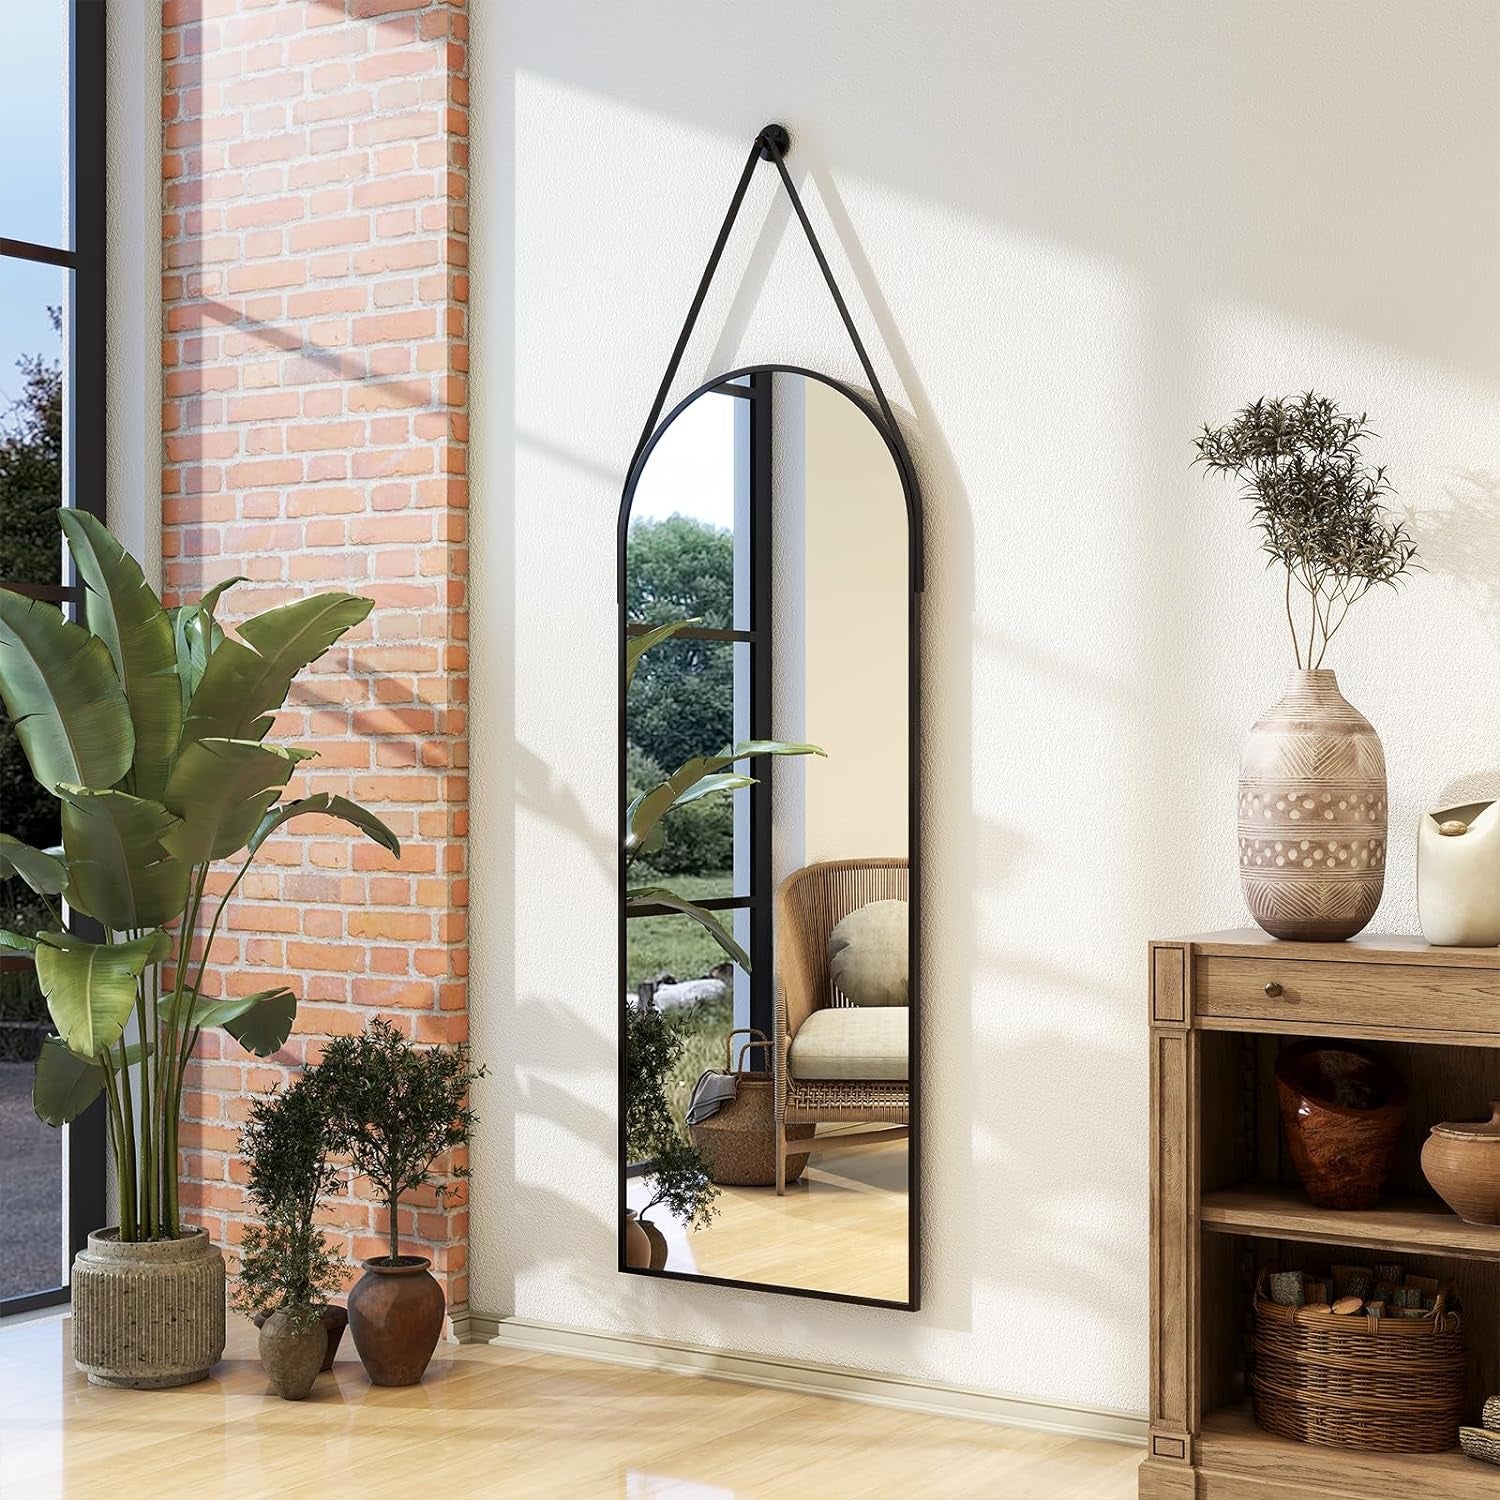 48'X16' Arched Wall Mirror with Hanging Mirror Leather Cord, Aluminum Frame - Wall-Mounted Hanging Mirror for Bathroom Vanity, Living Room, Bedroom, and Entryway Decor